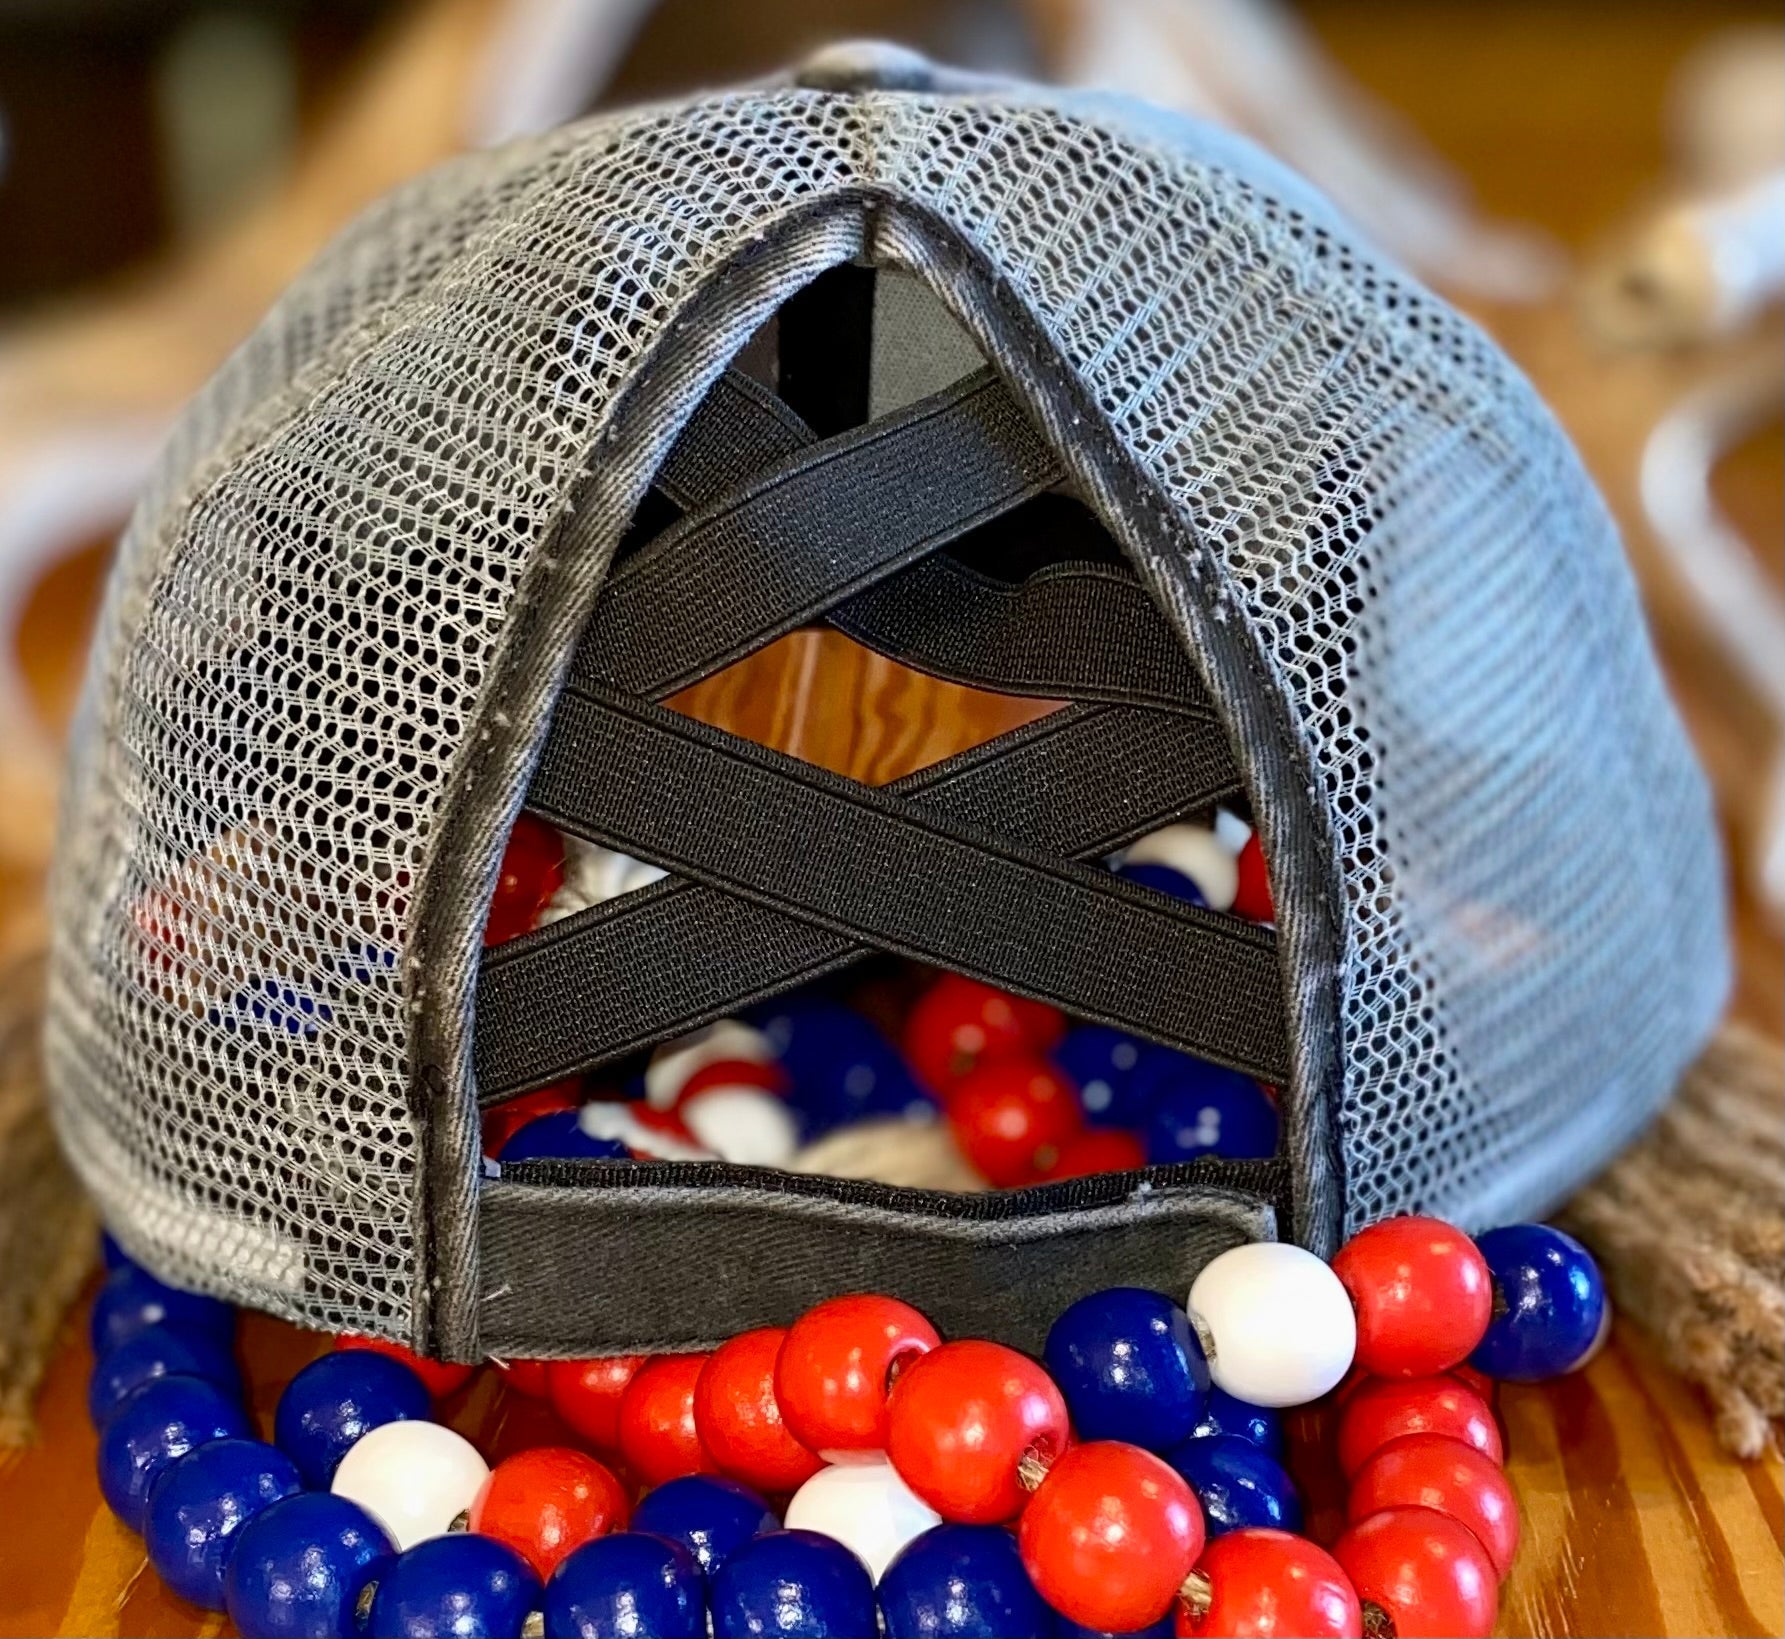 LET’S GET LIT CAP - CountryFide Custom Accessories and Outdoors